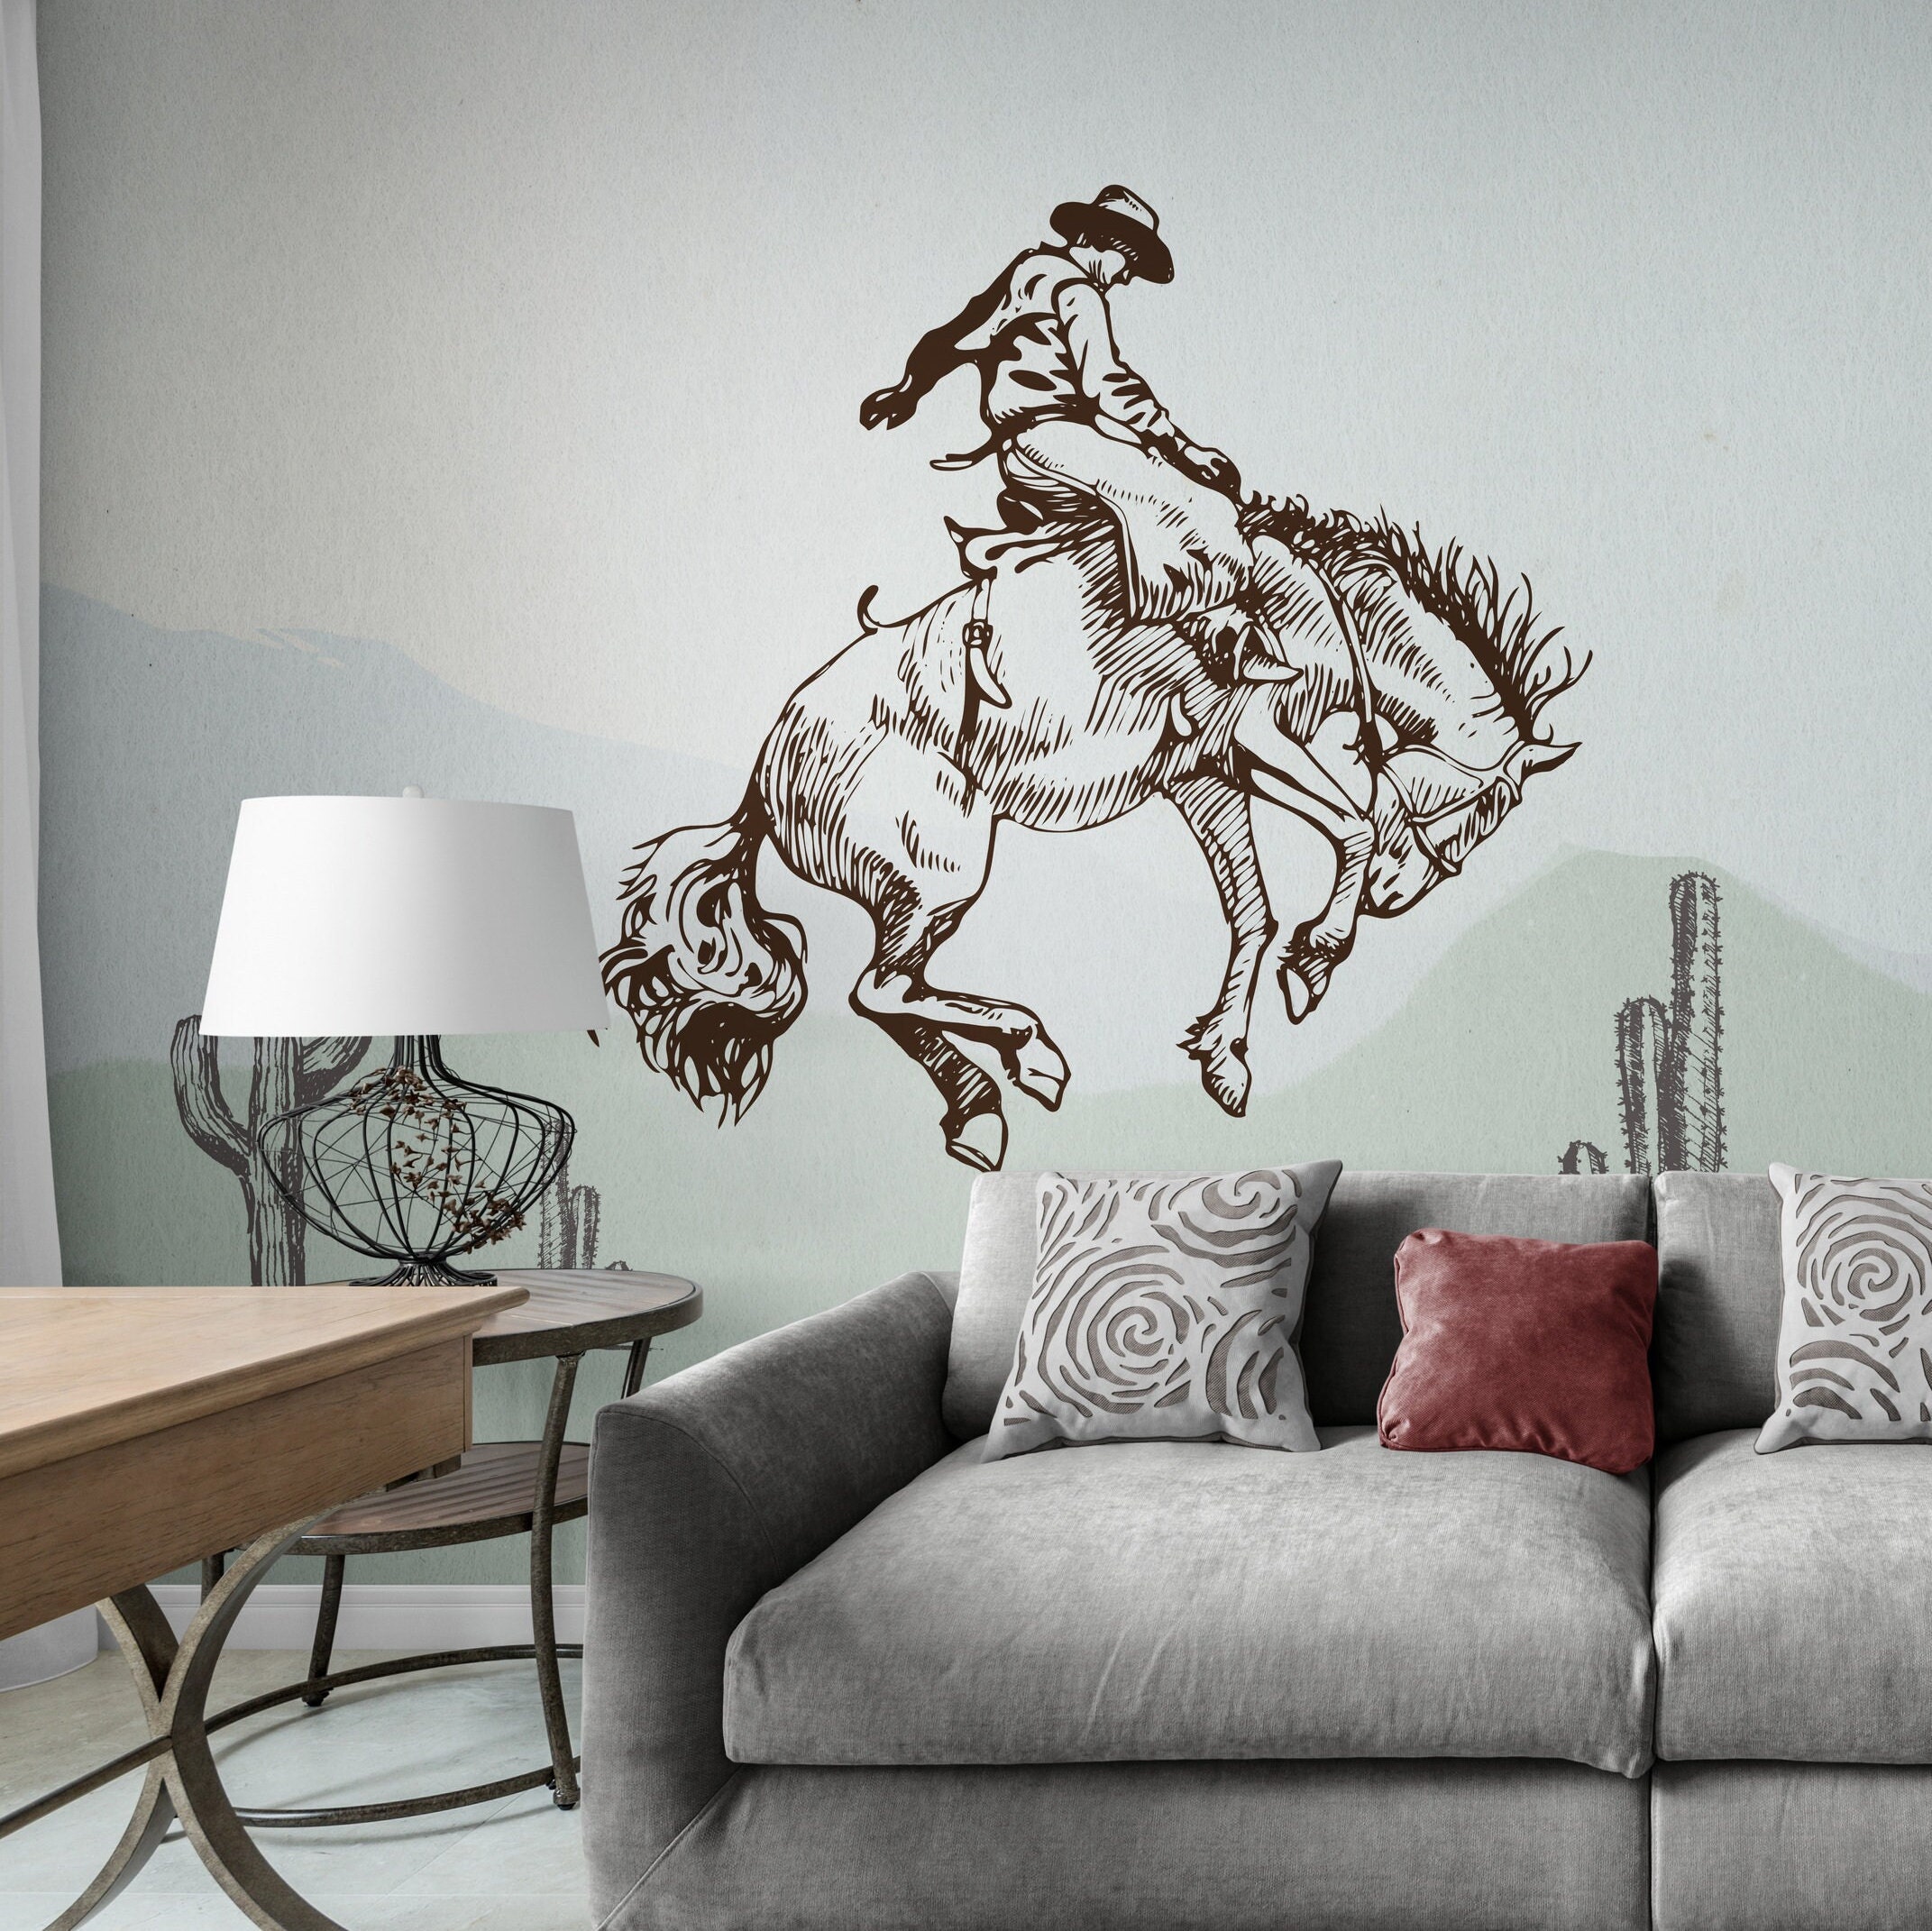 Western Wall Decal Cowboy Wallpaper Horse Mural Wall Paper | Etsy